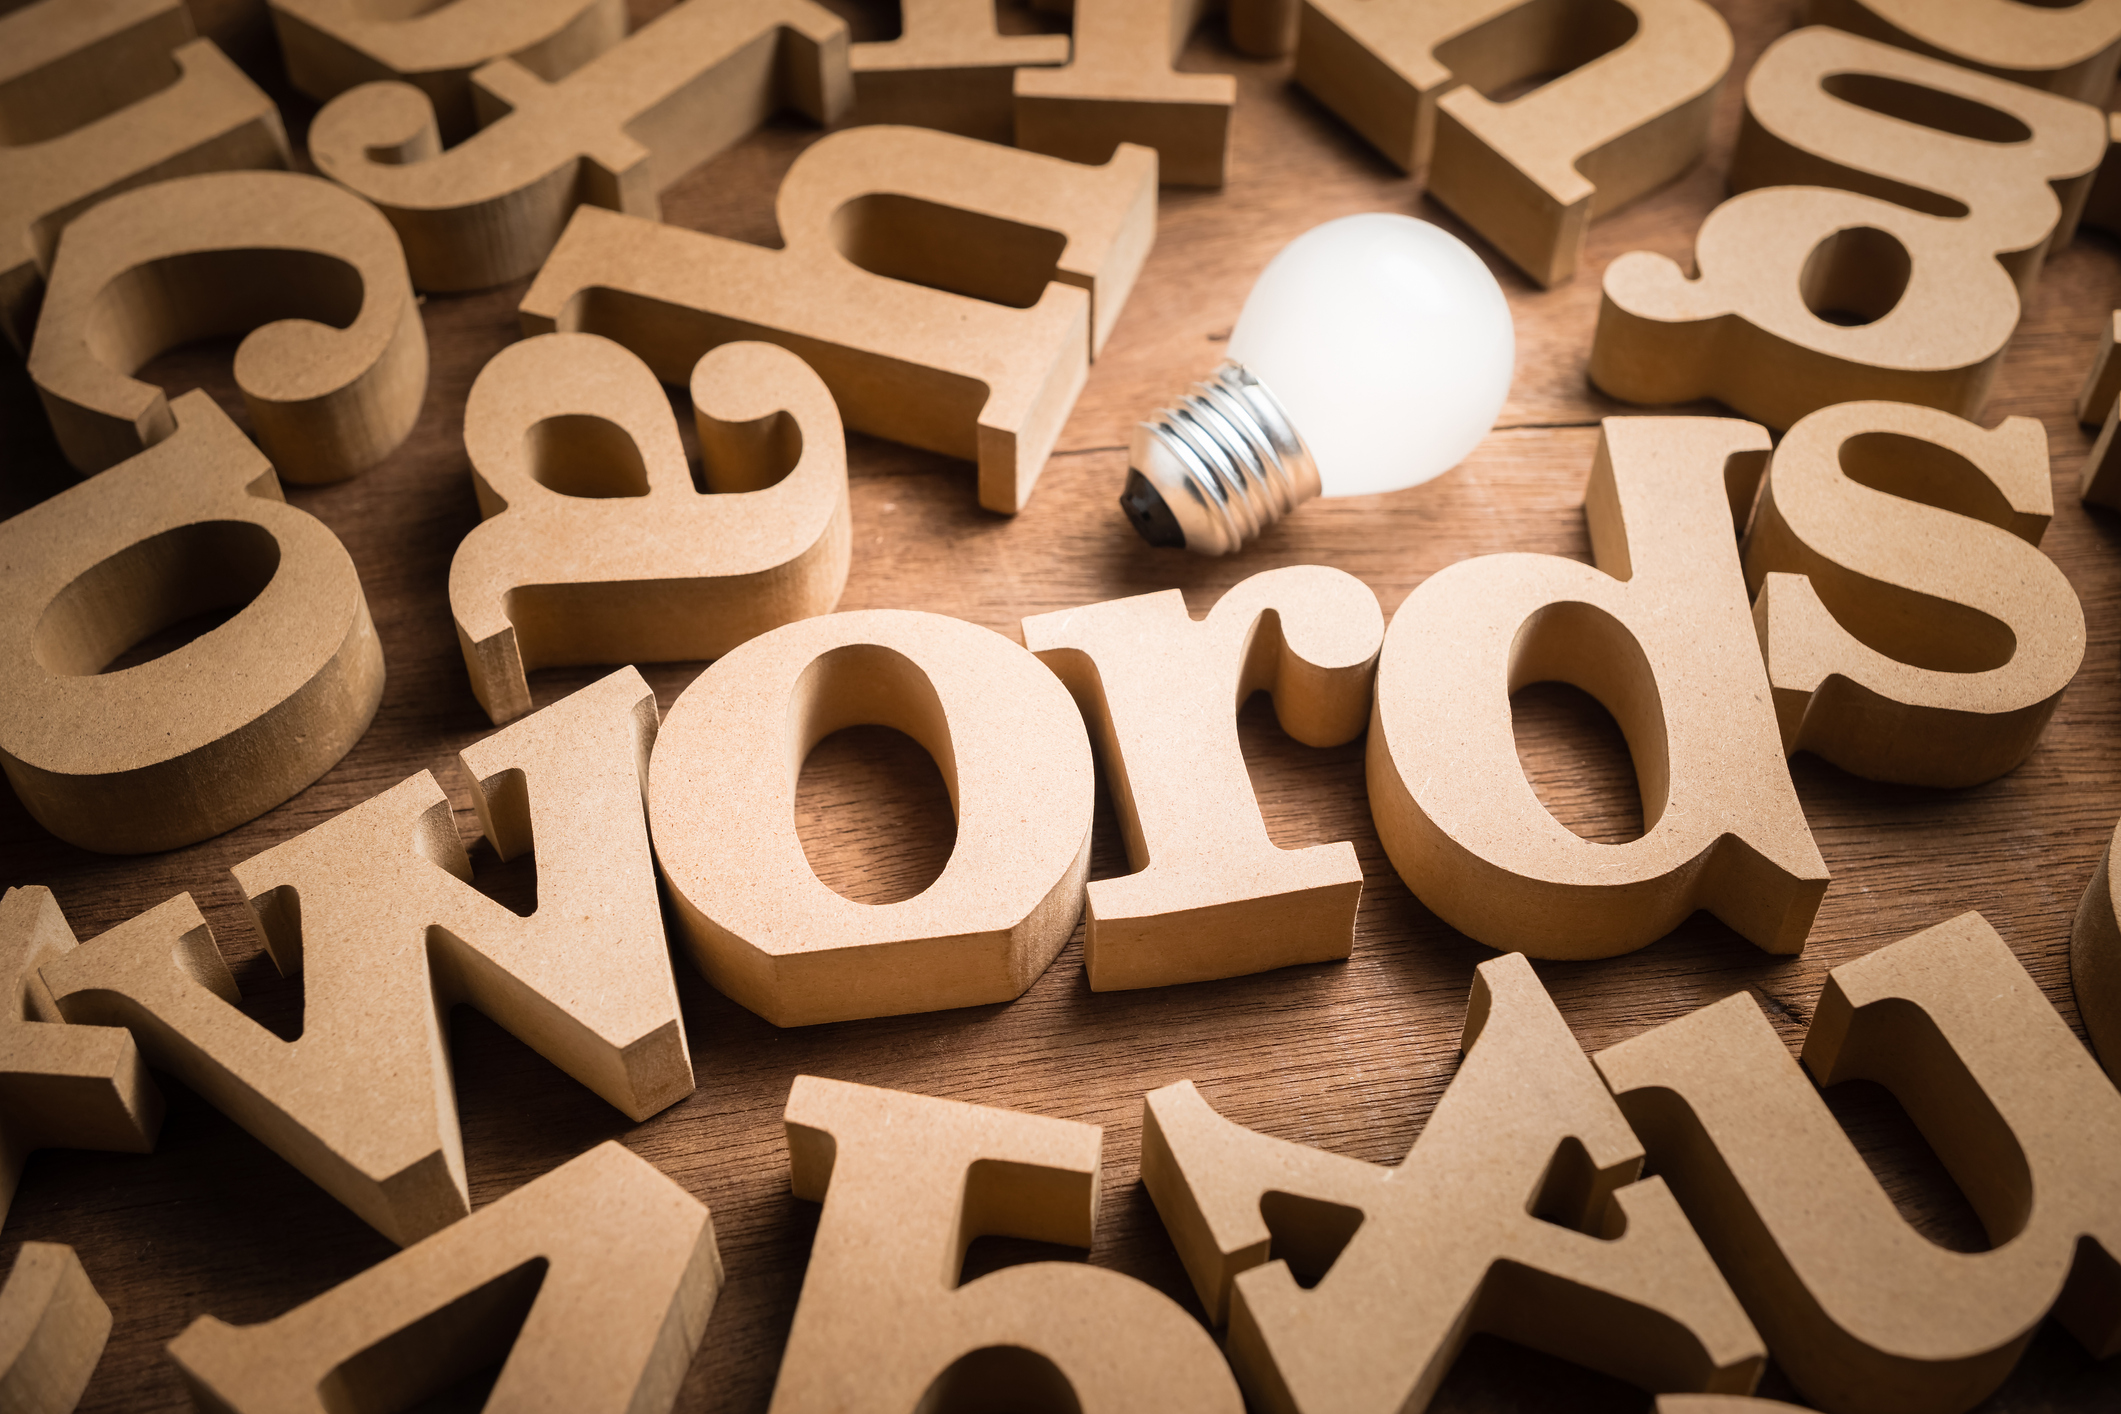 Word spelled out next to lightbulb